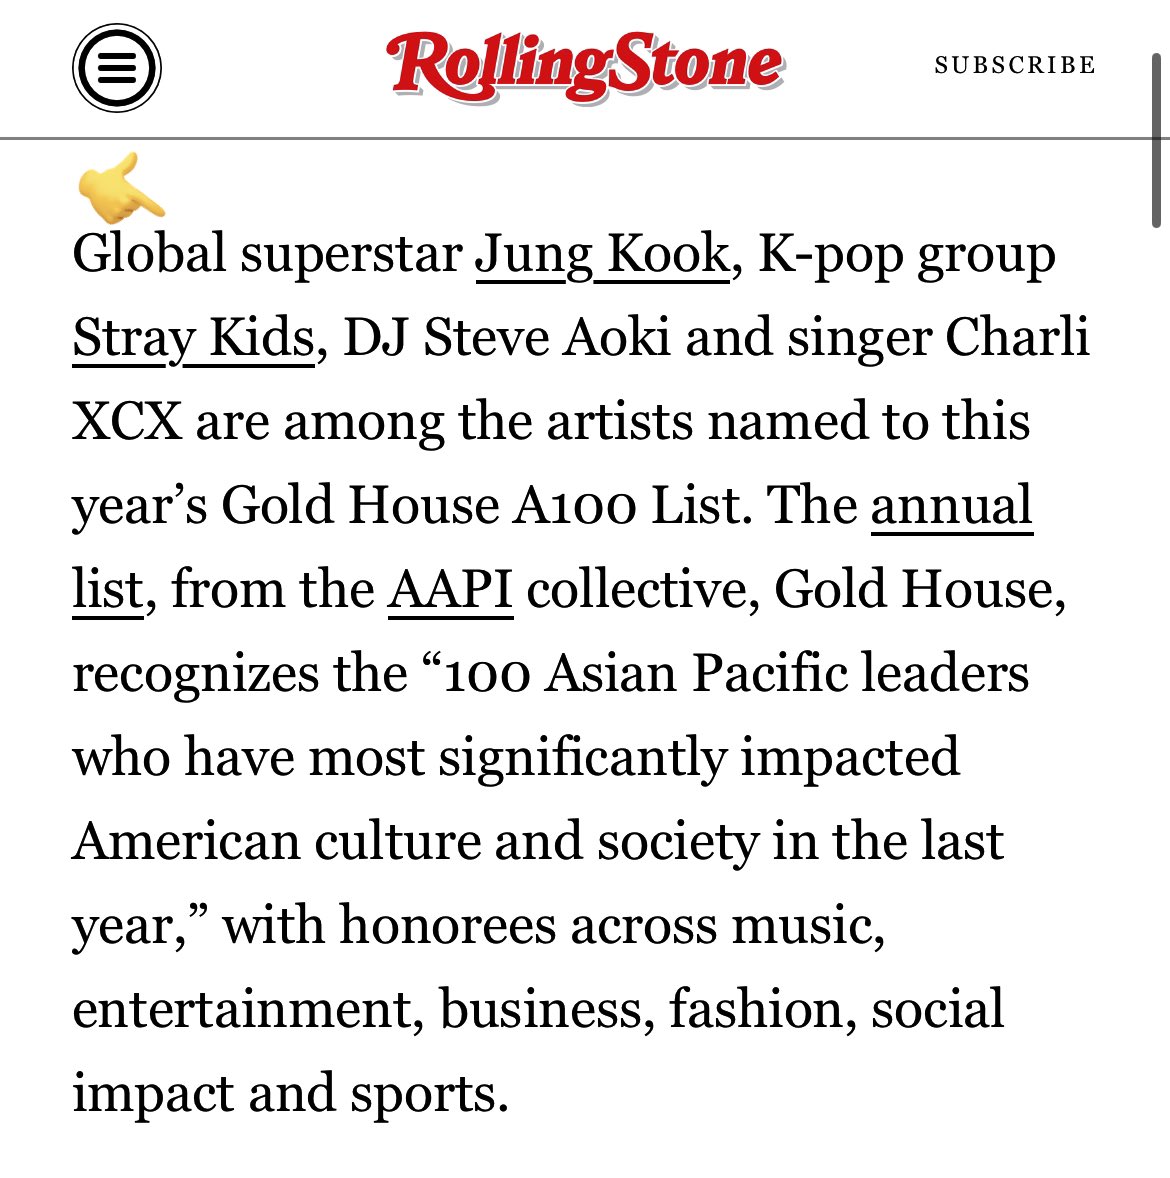 Not BTS Jungkook or kpop star Jungkook, but simply Global Superstar Jungkook.

This is the level Jungkook is operating in and I hope JJKs have a bit more pride and stop engaging with morons.